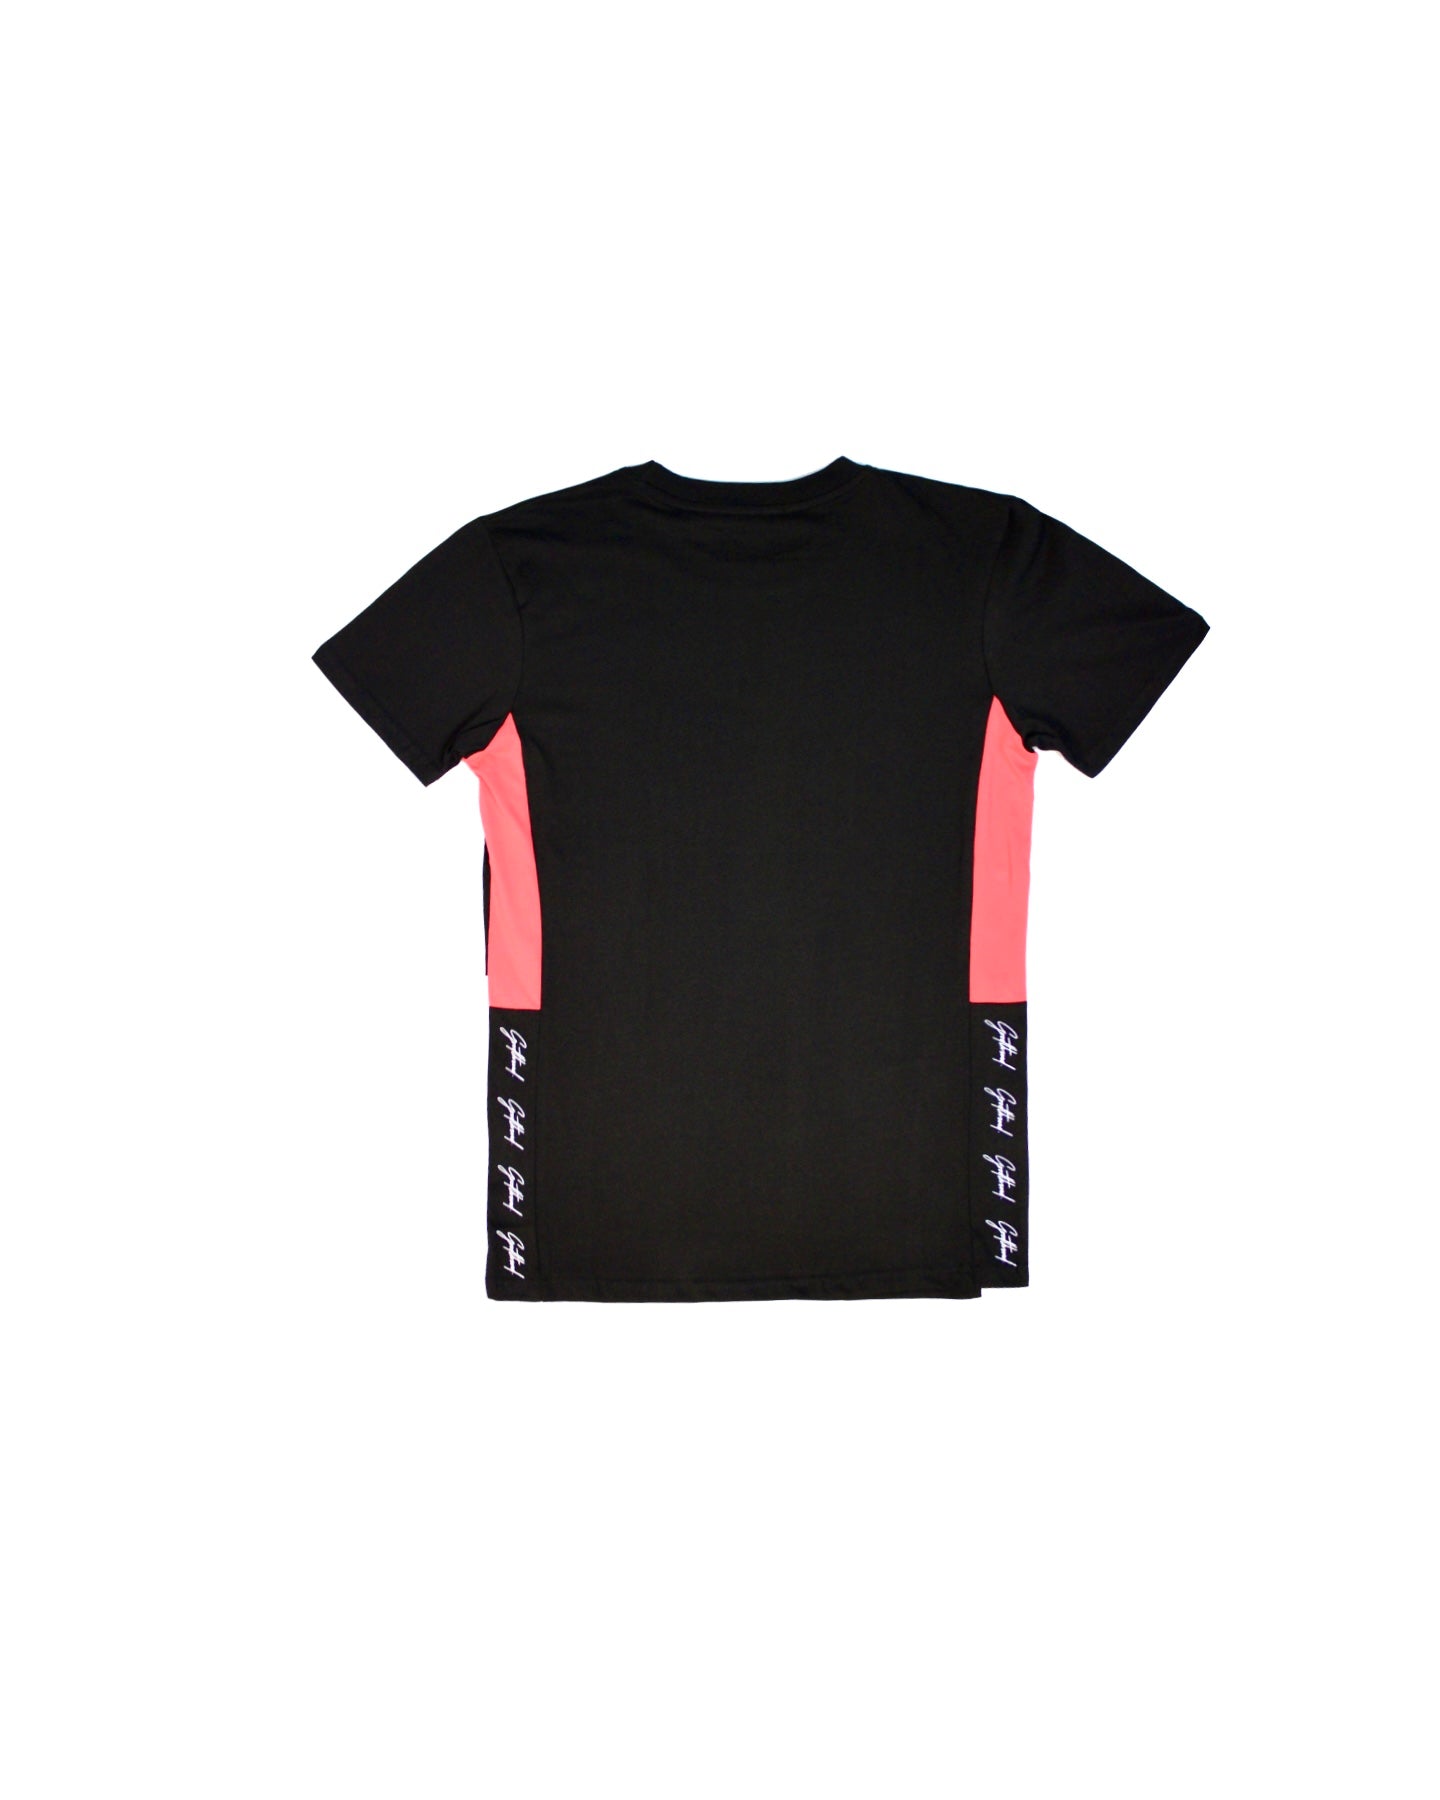 Black Red White Comfy Tee